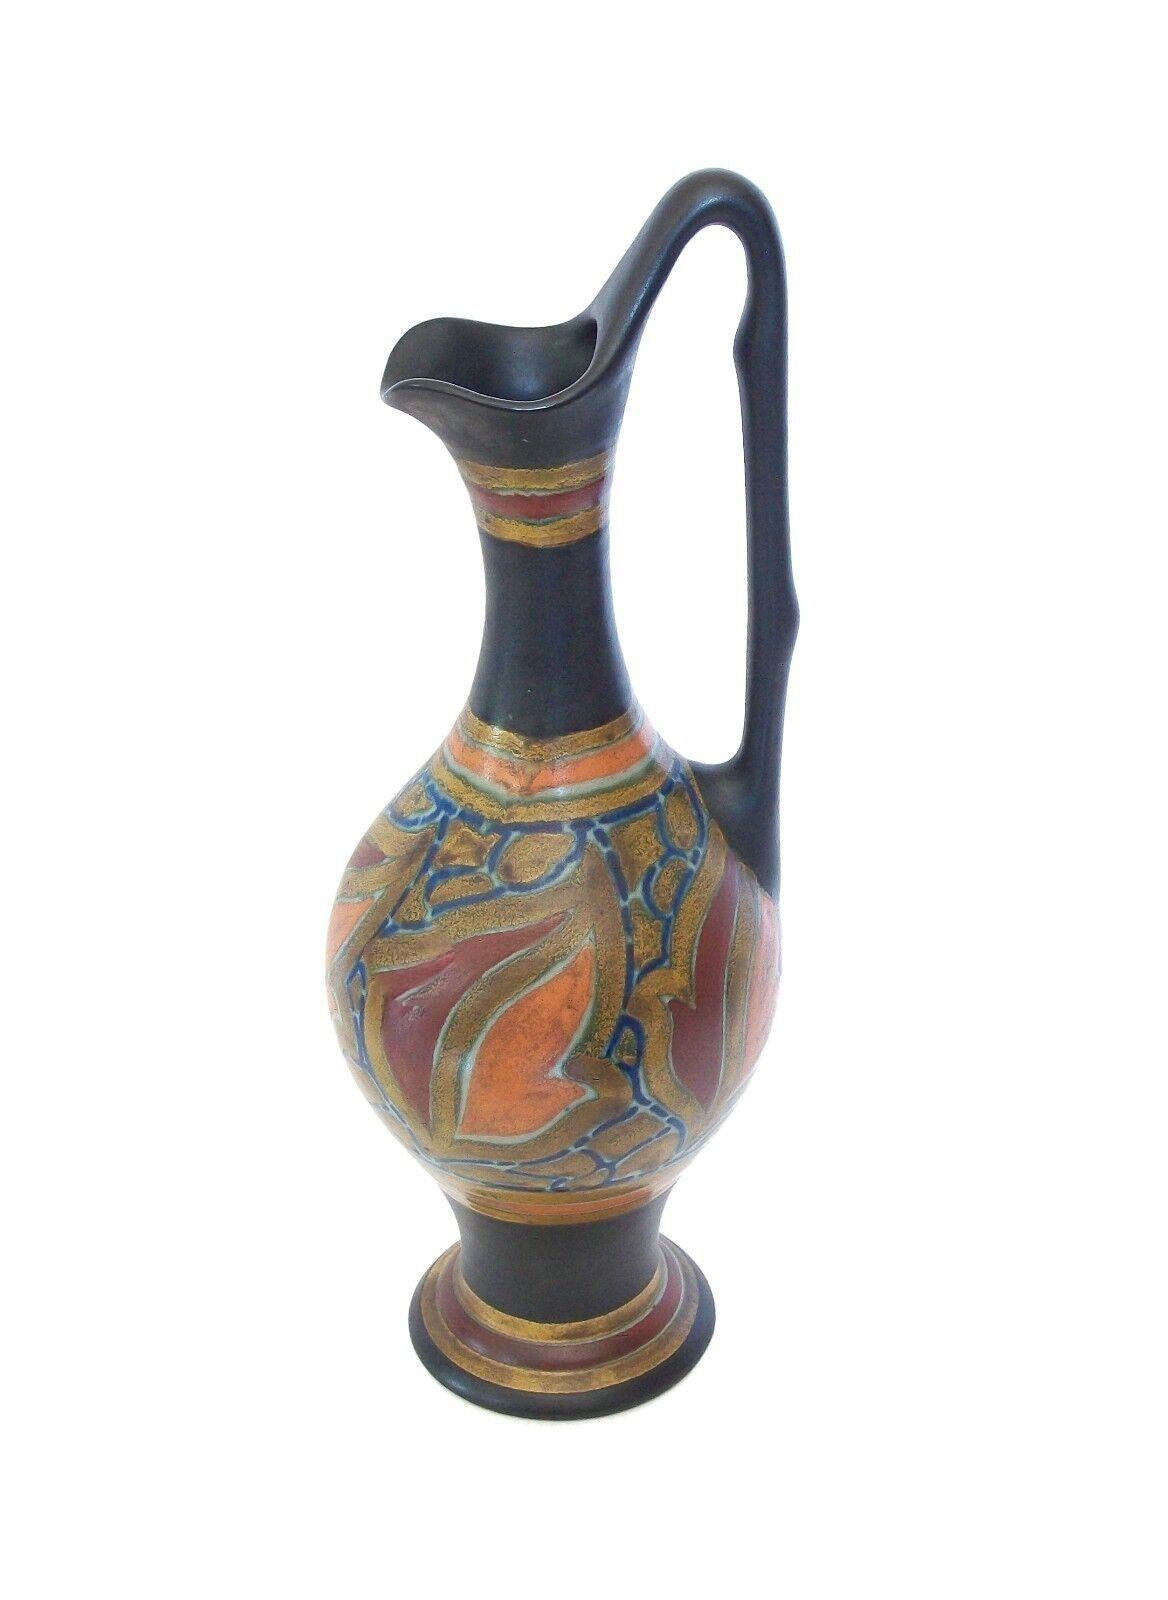 Plateelbakkerij- Antique Gouda Art Nouveau ceramic ewer - large size - matte finish glaze with hand painted leaf pattern and triple line borders - remnants of original Plateelbakkerij Zuid-Holland paper label on the base - also signed on the base -